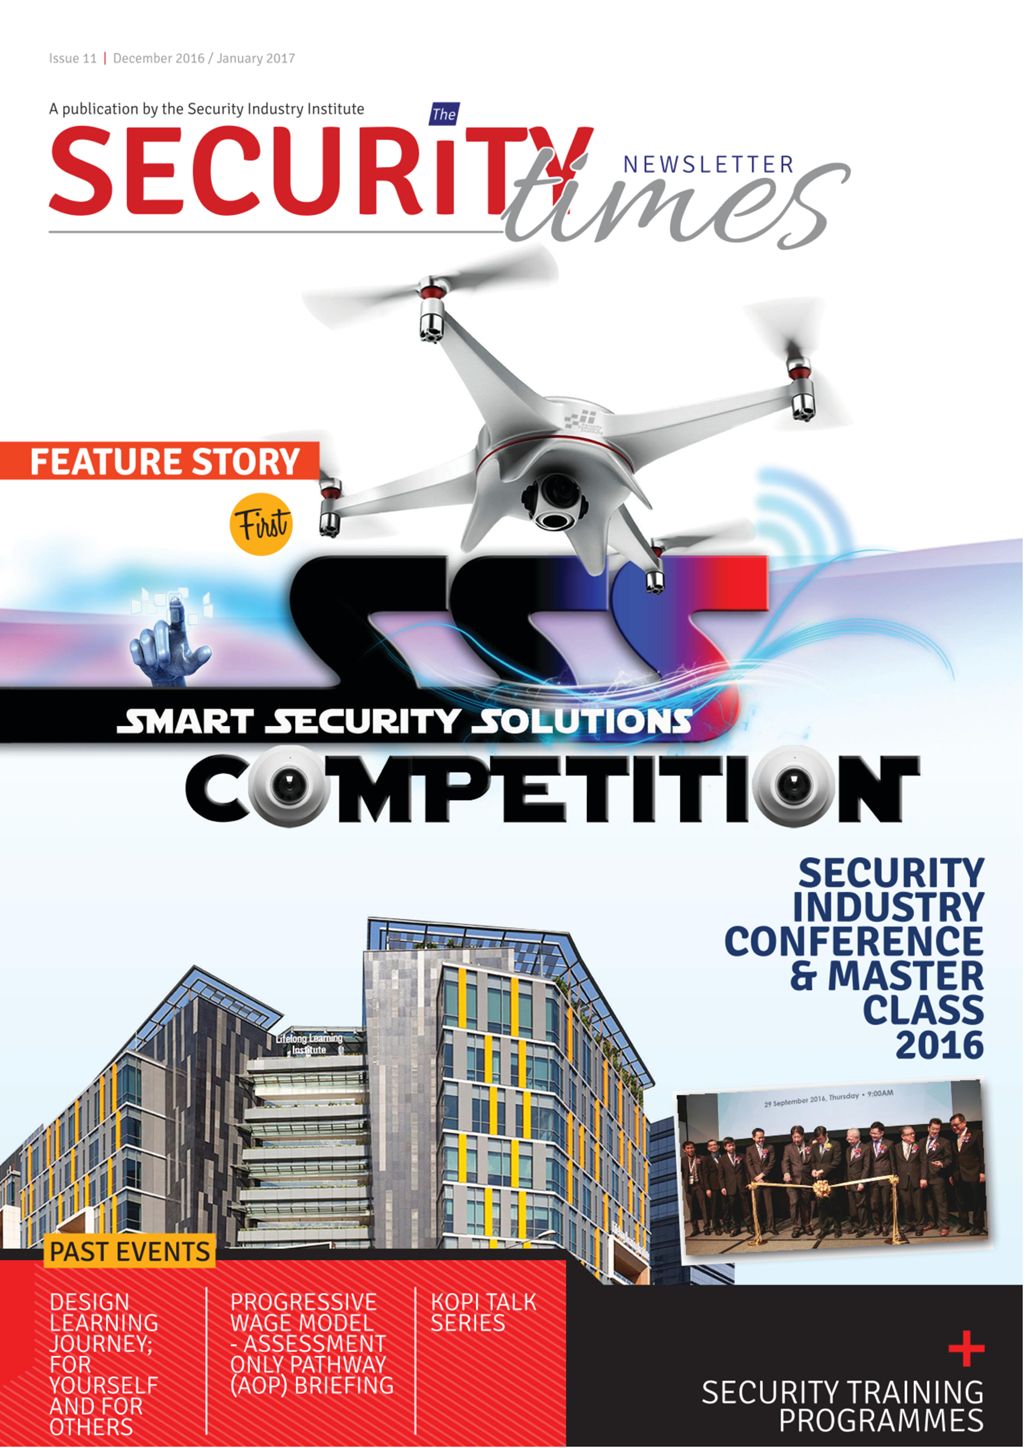 The Security Times : a publication by the Security Industry Institute. Dec. 2016 / Jan. 2017. Issue 11